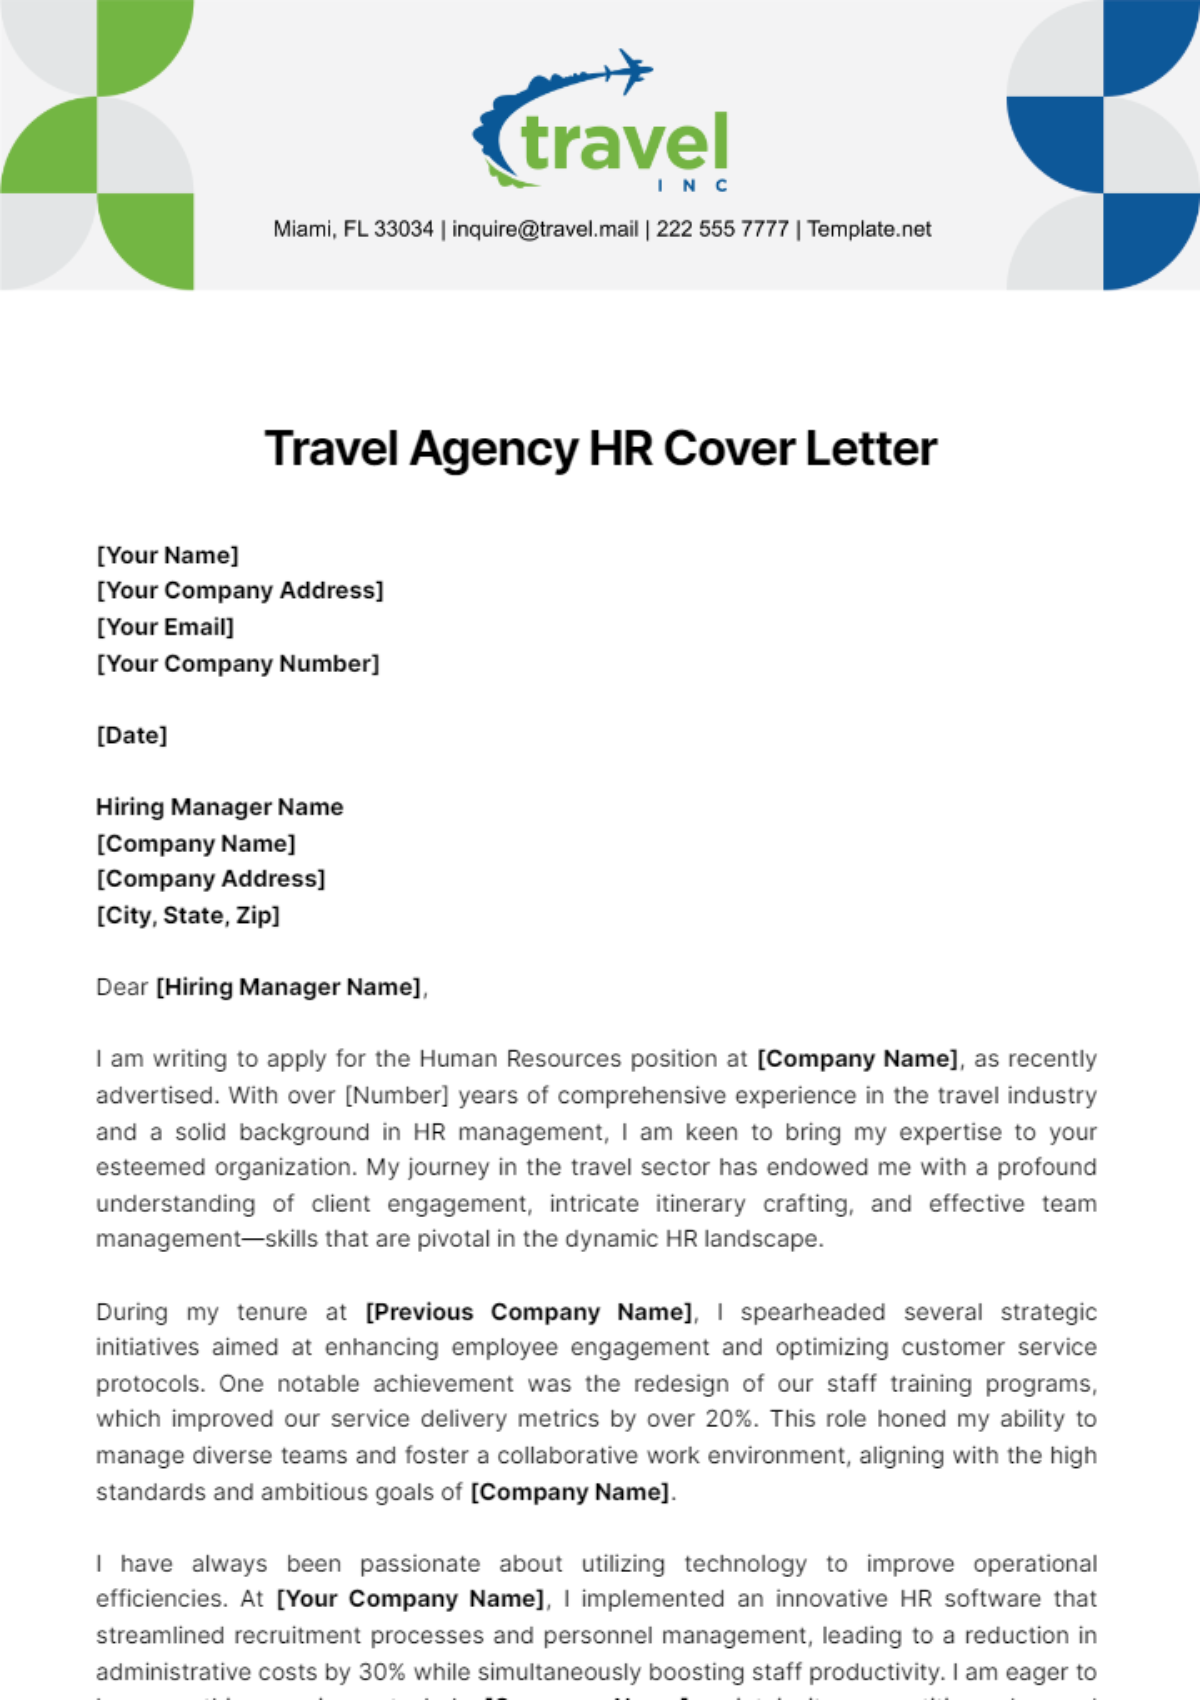 Travel Agency HR Cover Letter Template